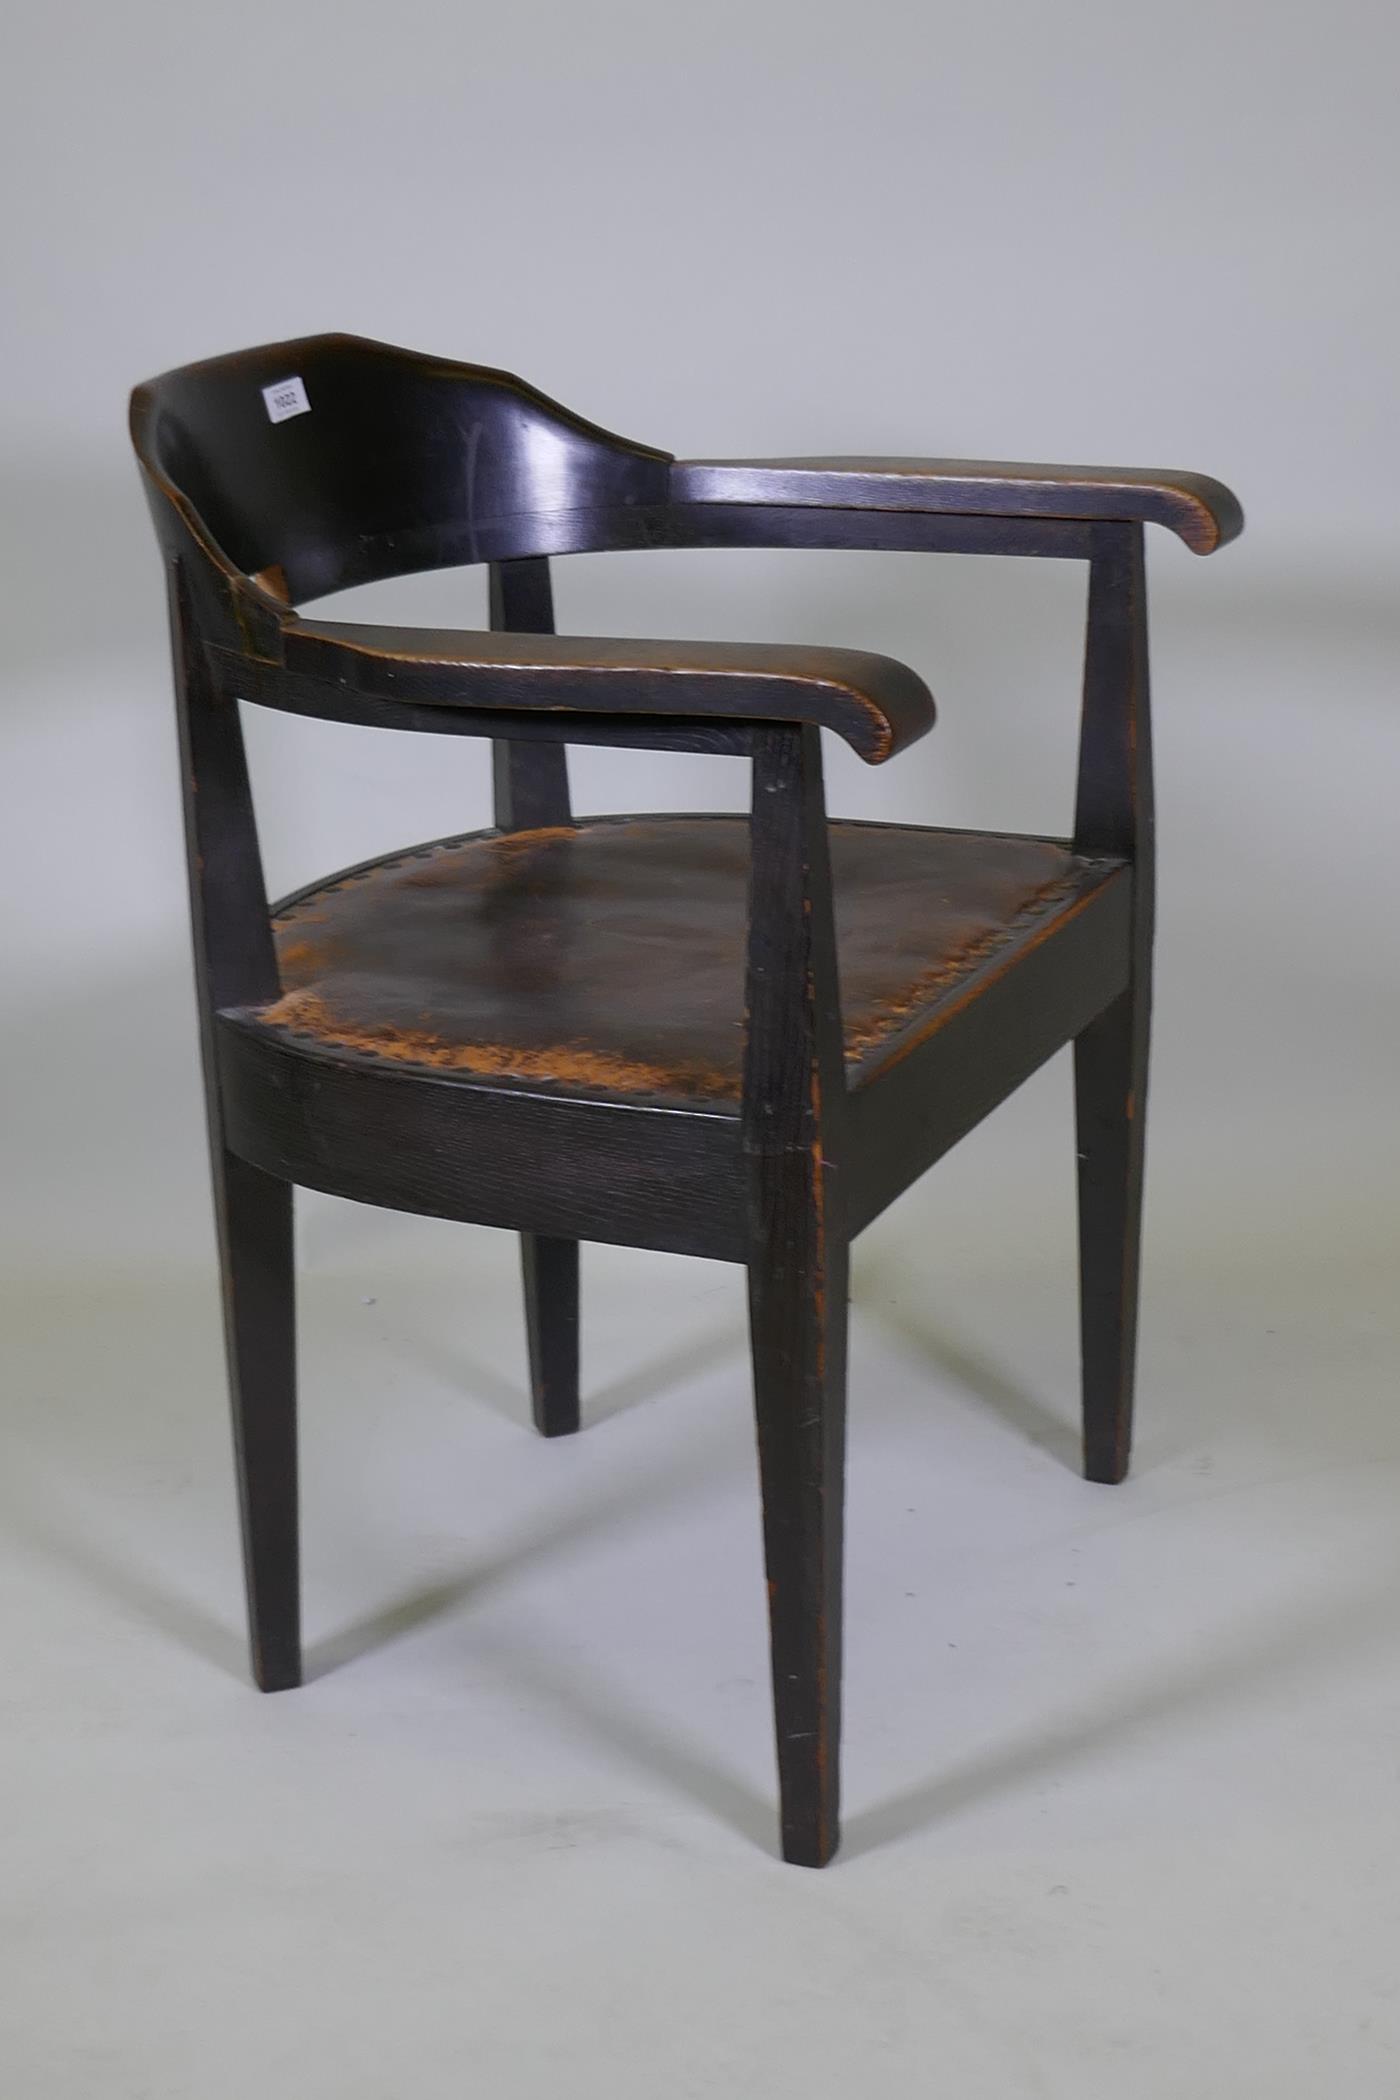 A late C19th/early C20th German oak tub chair with leather studded seat - Image 3 of 4